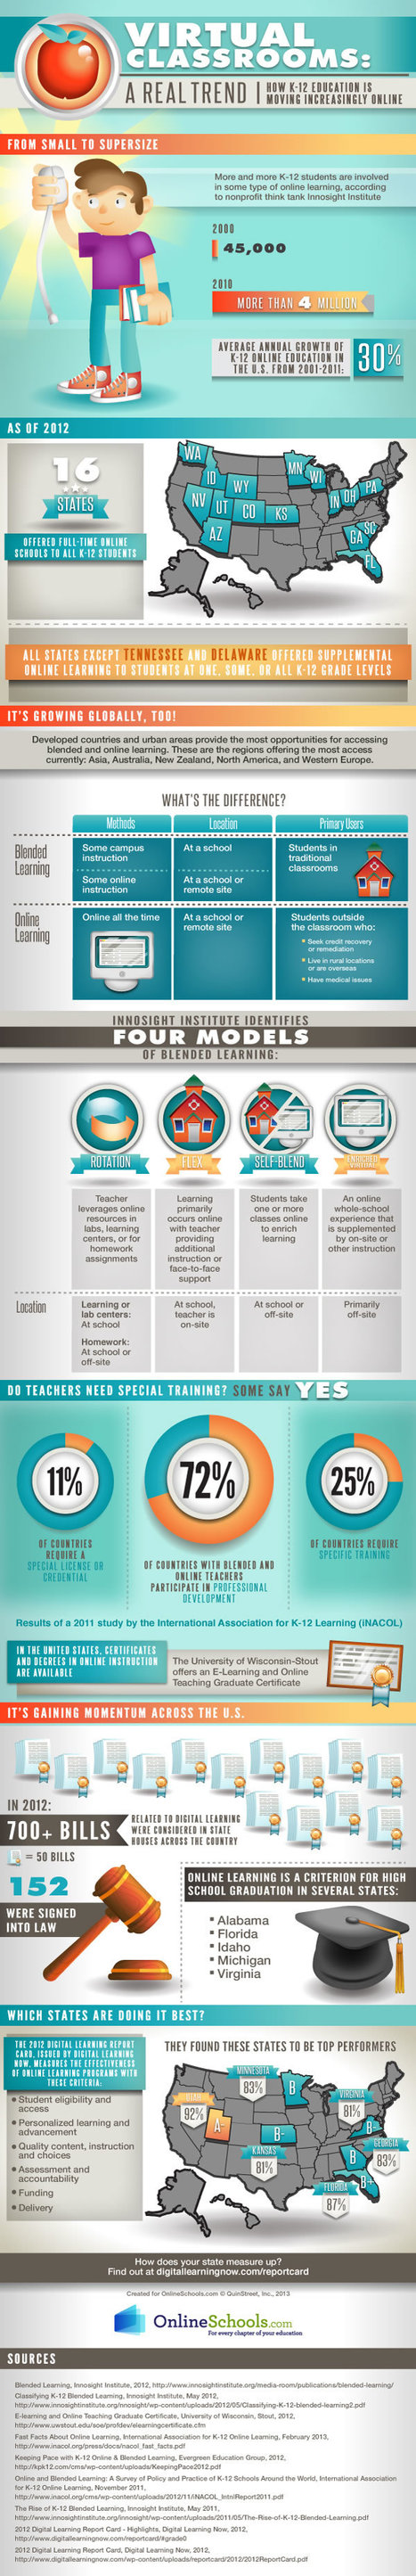 The Teacher's Quick Guide To Blended Learning [Infographic] | Tice & Co | Scoop.it